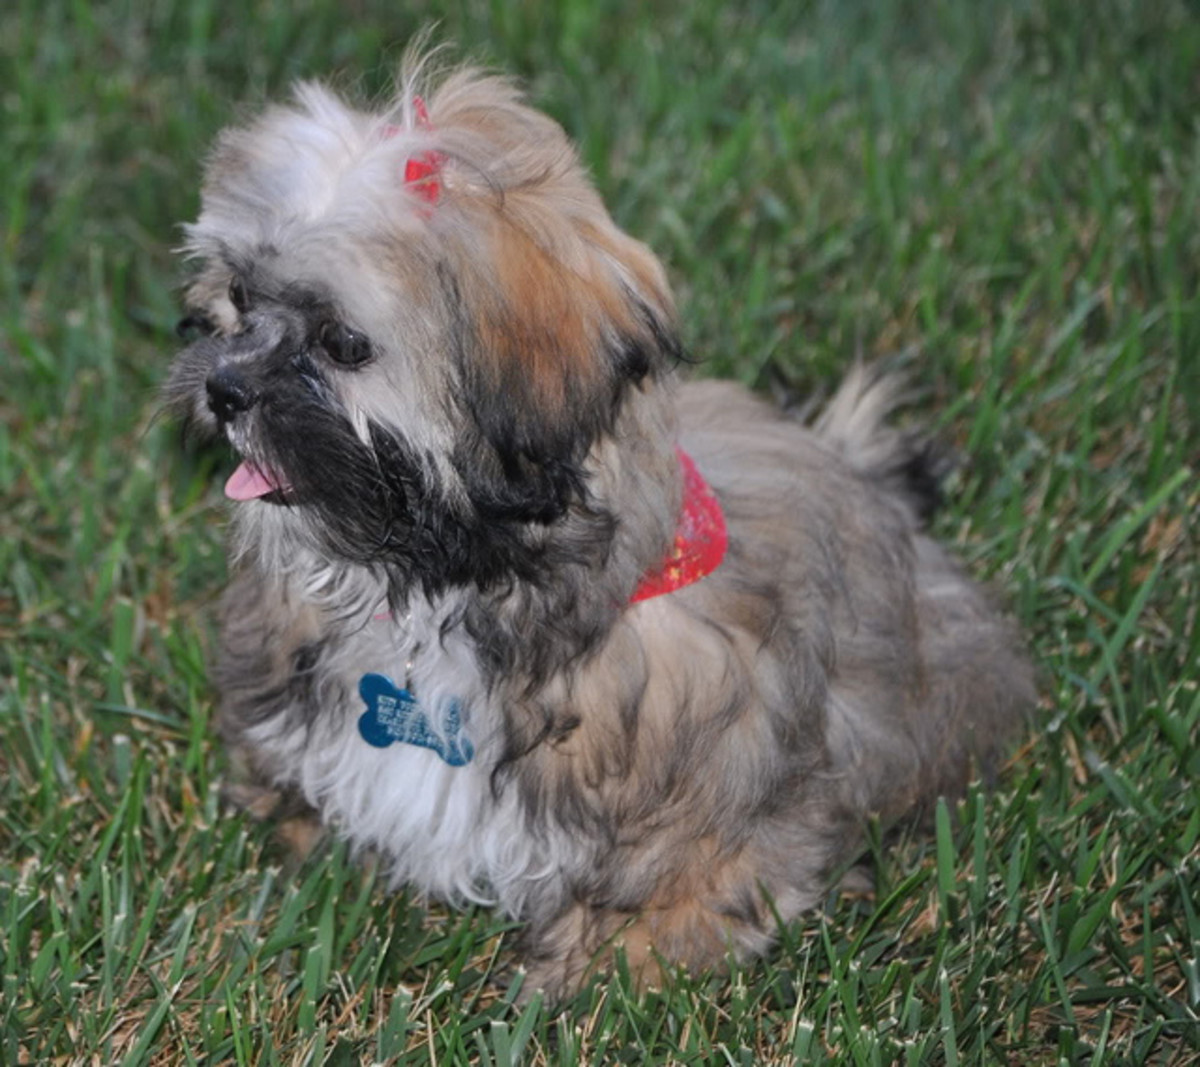 If you get a Shih Tzu puppy he should have his teeth brushed daily.